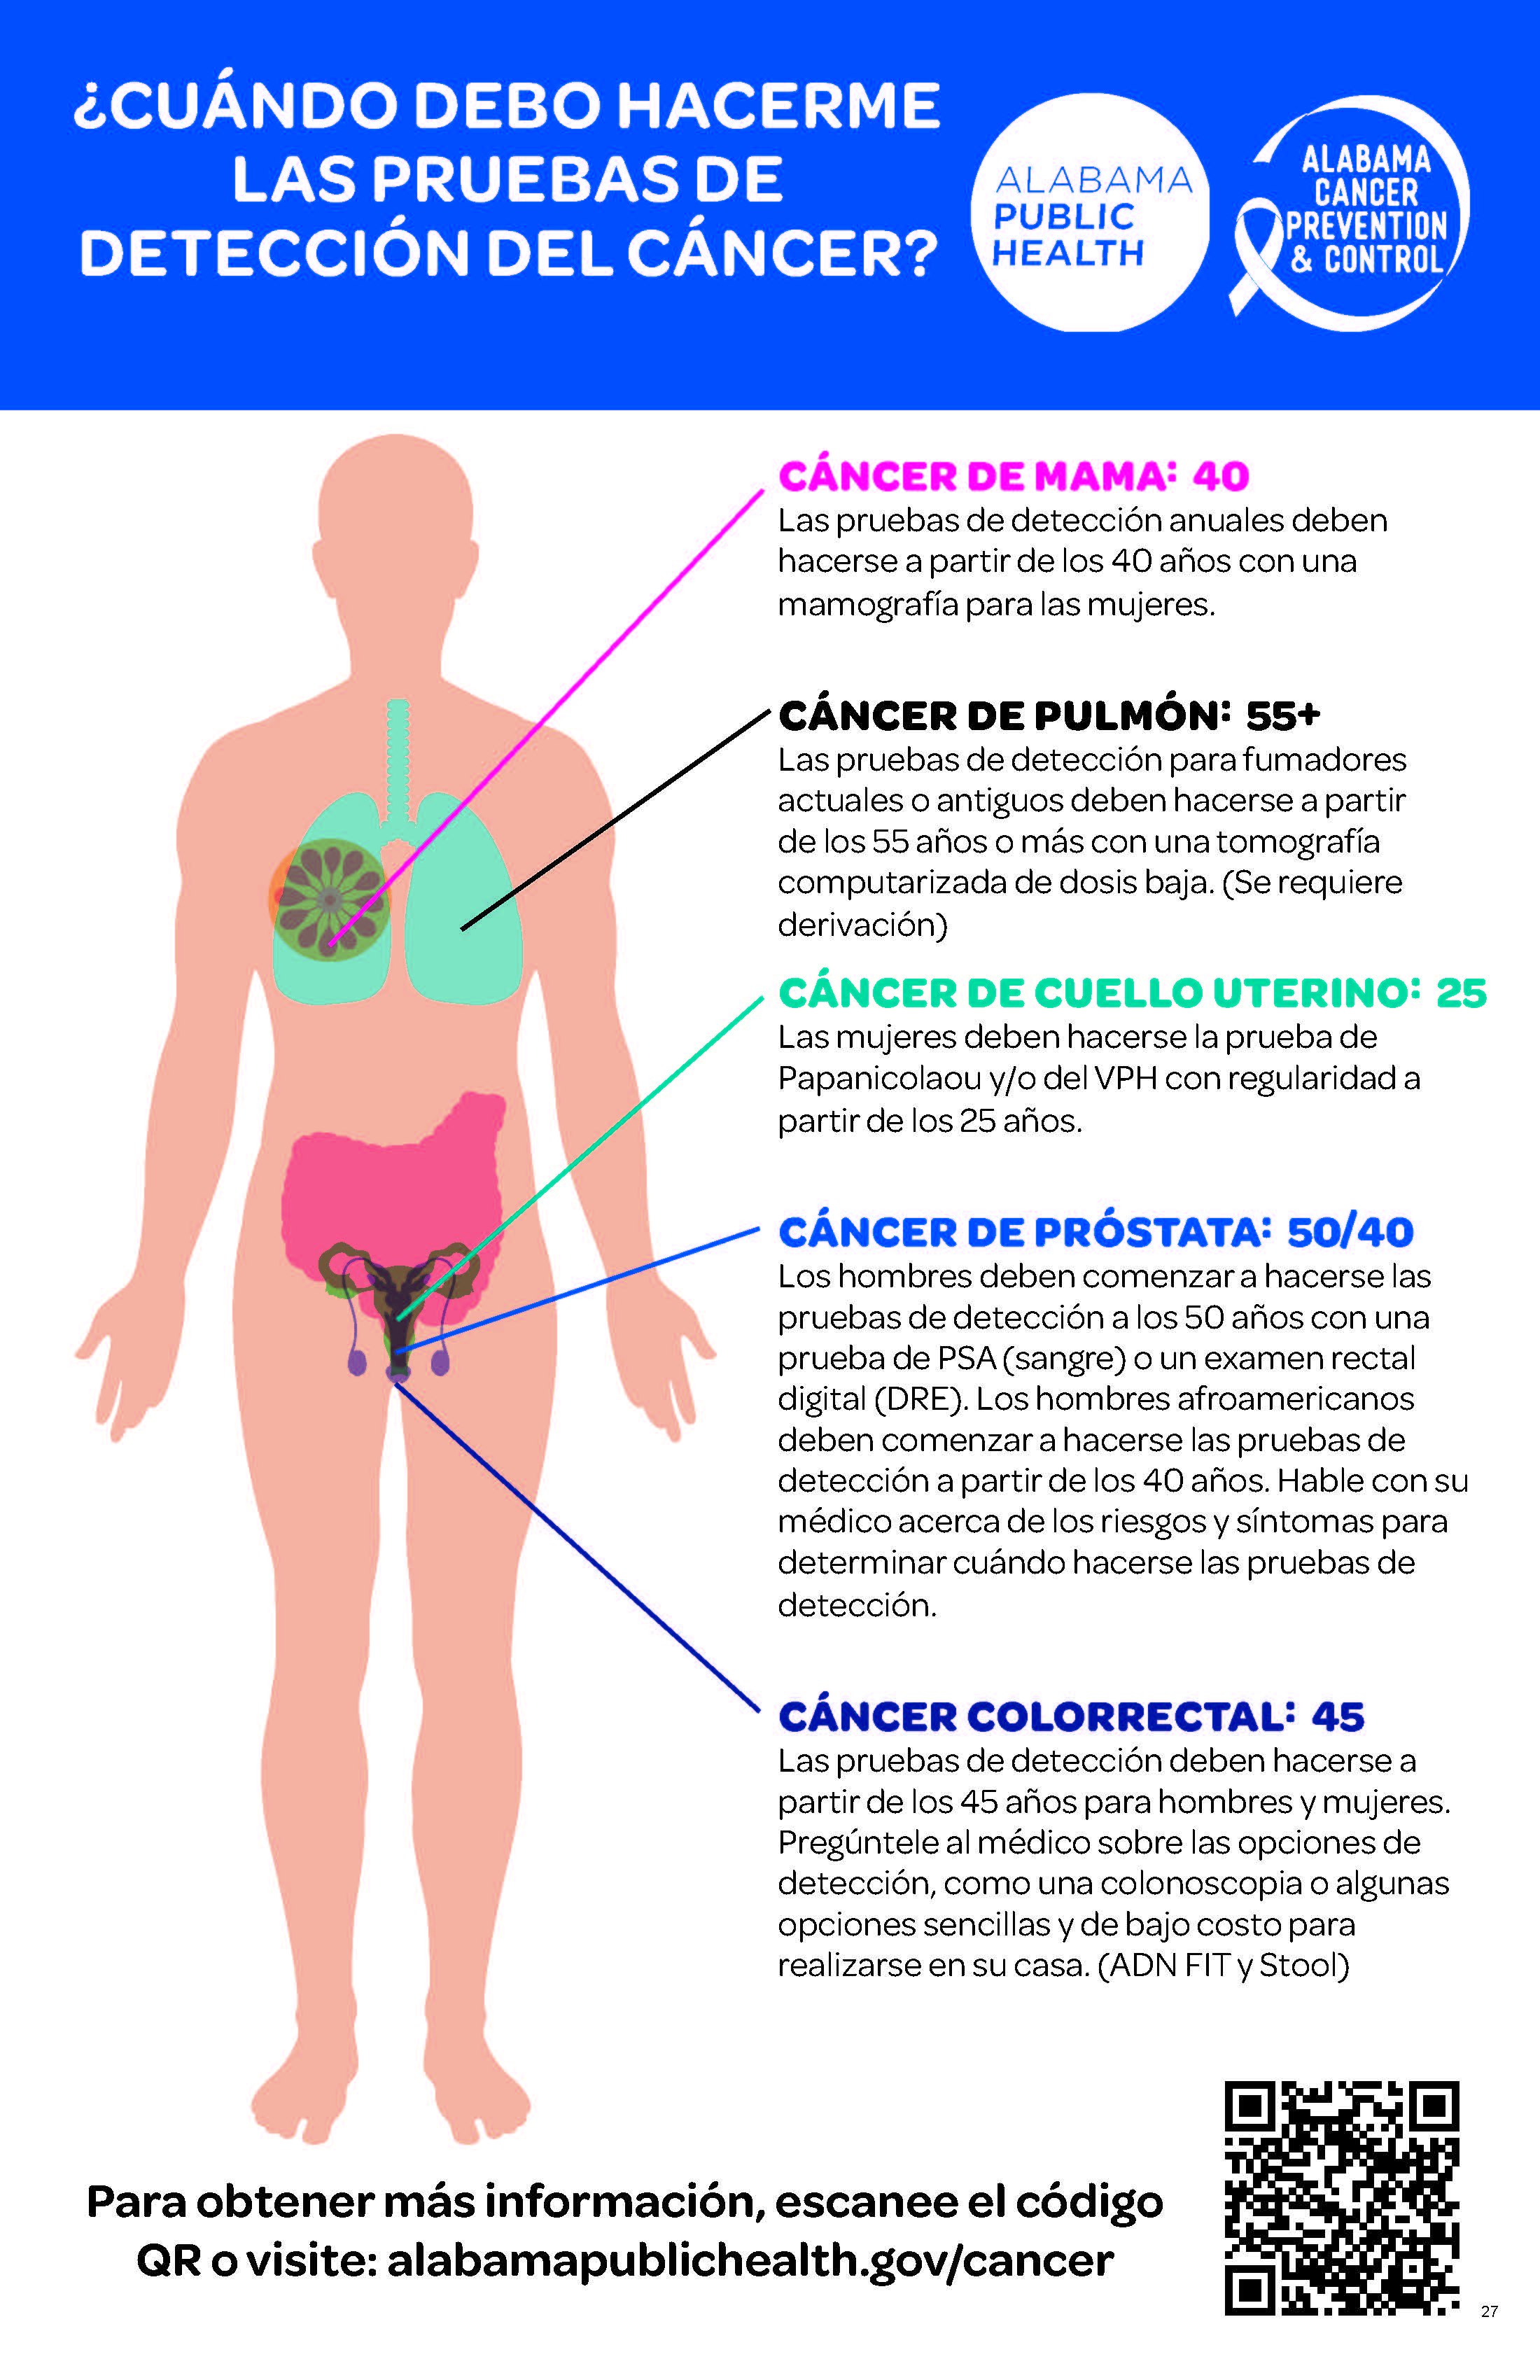 When Do I Need To Get My Cancer Screenings? (Spanish)